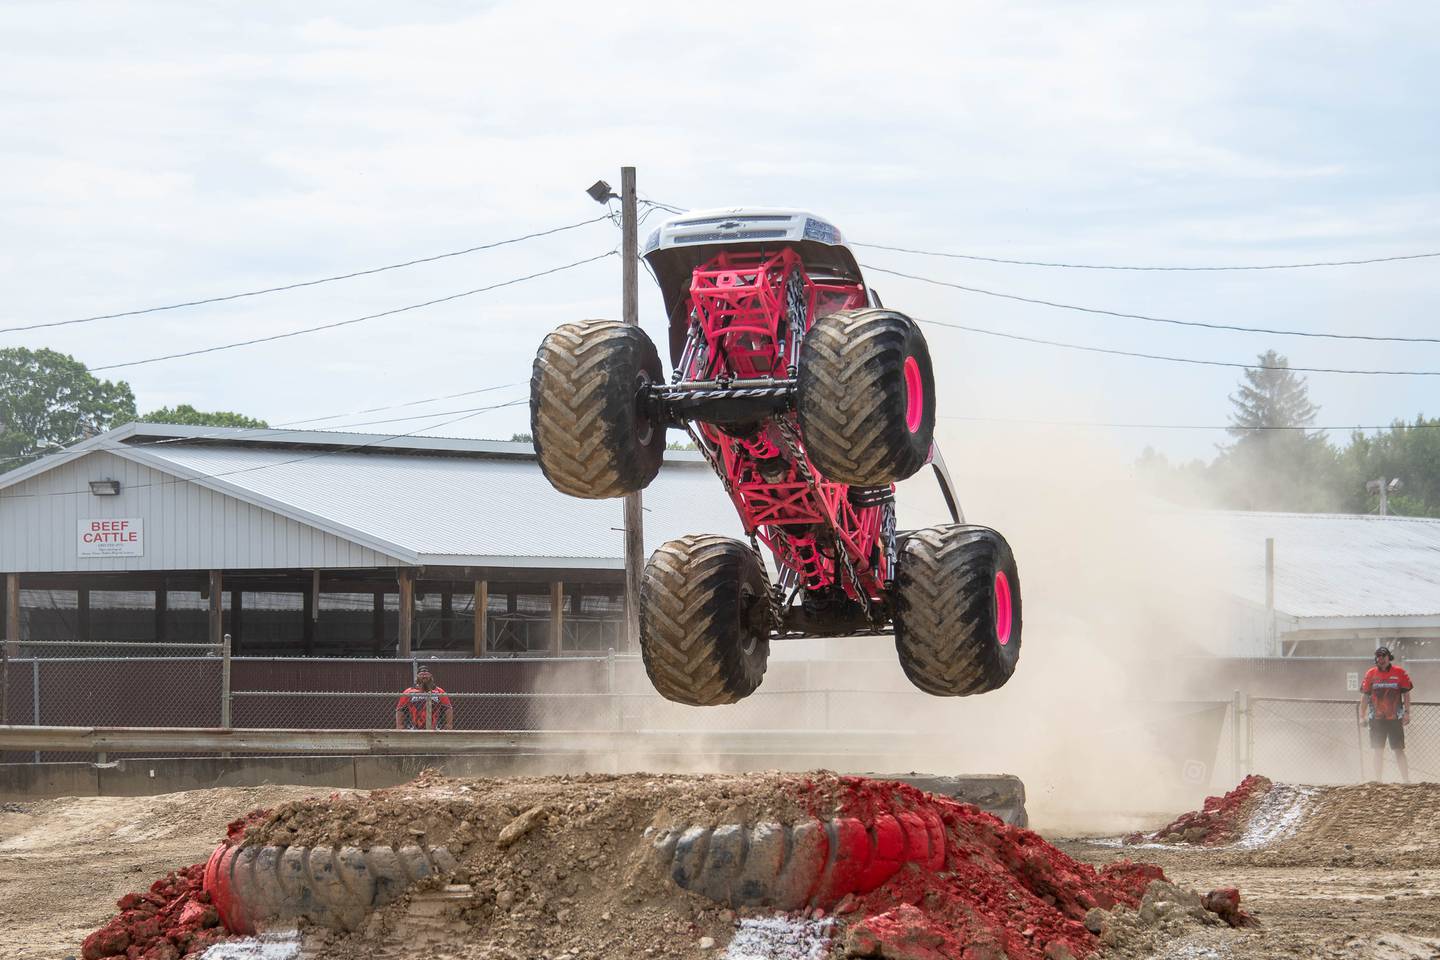 The Renegade Monster Truck Tour comes to the Anne Arundel County Fairgrounds this weekend, July 14-16.